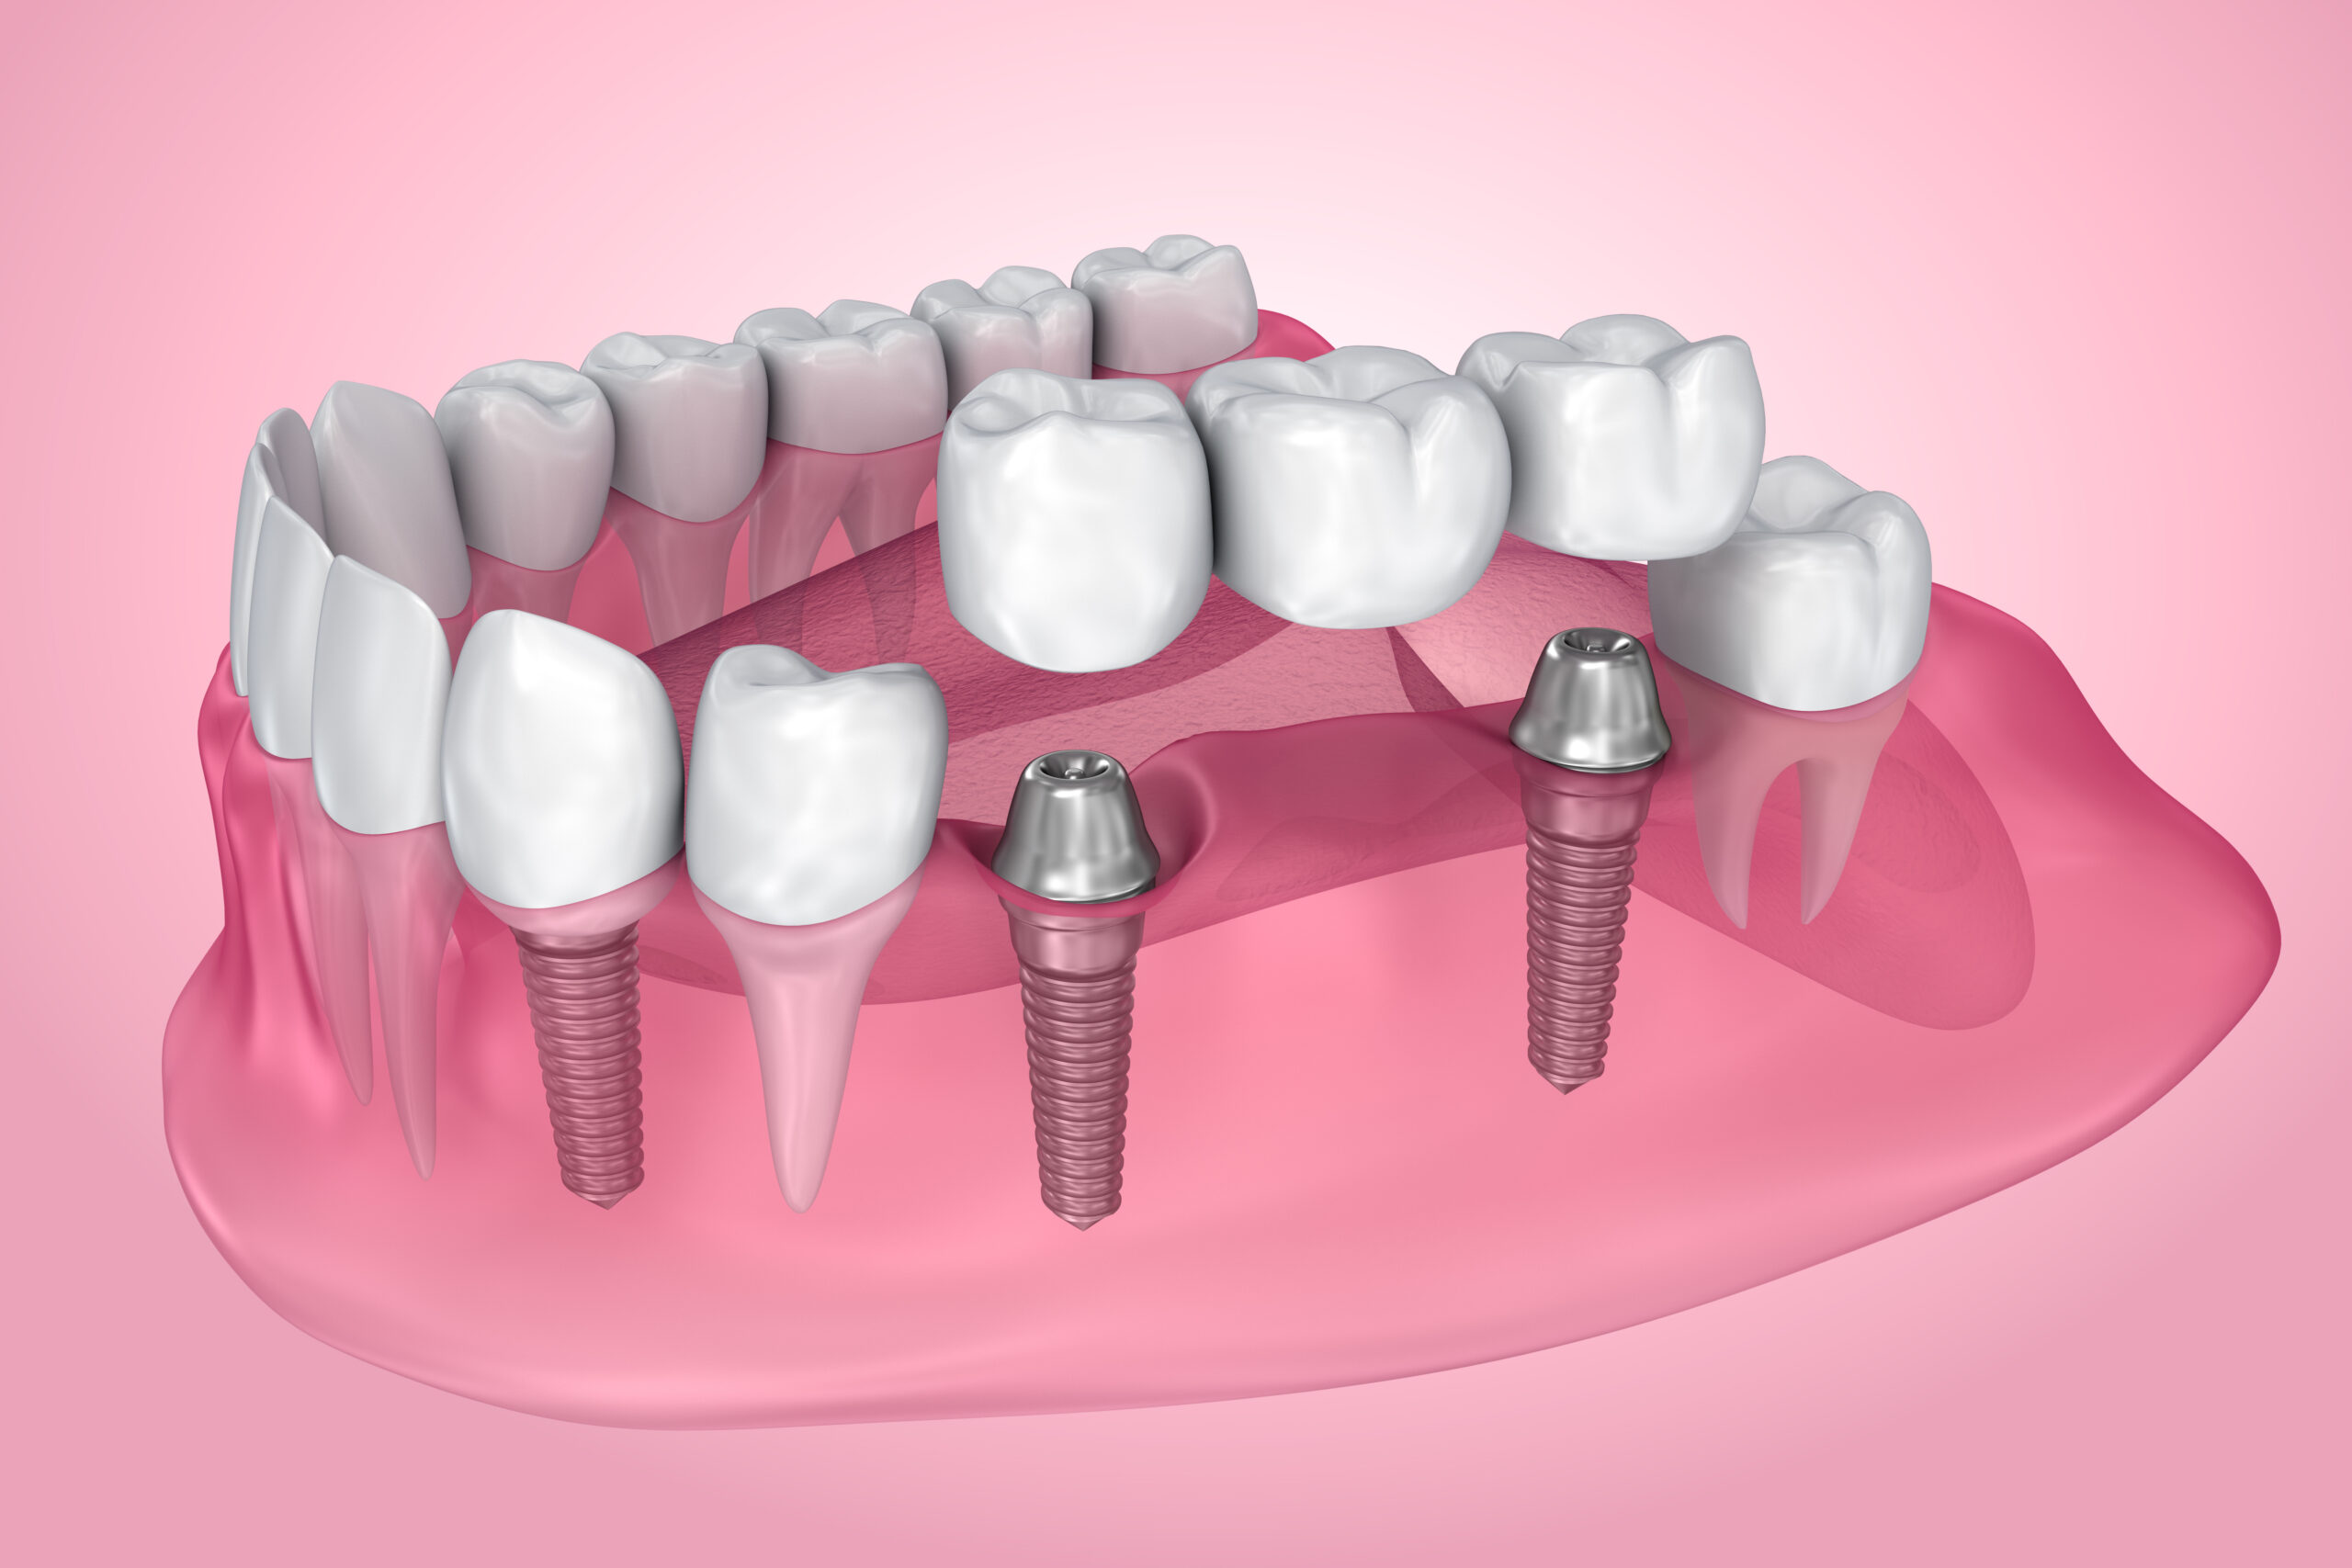 implant supported fixed bridge. Transparent view . Medically accurate 3D illustration